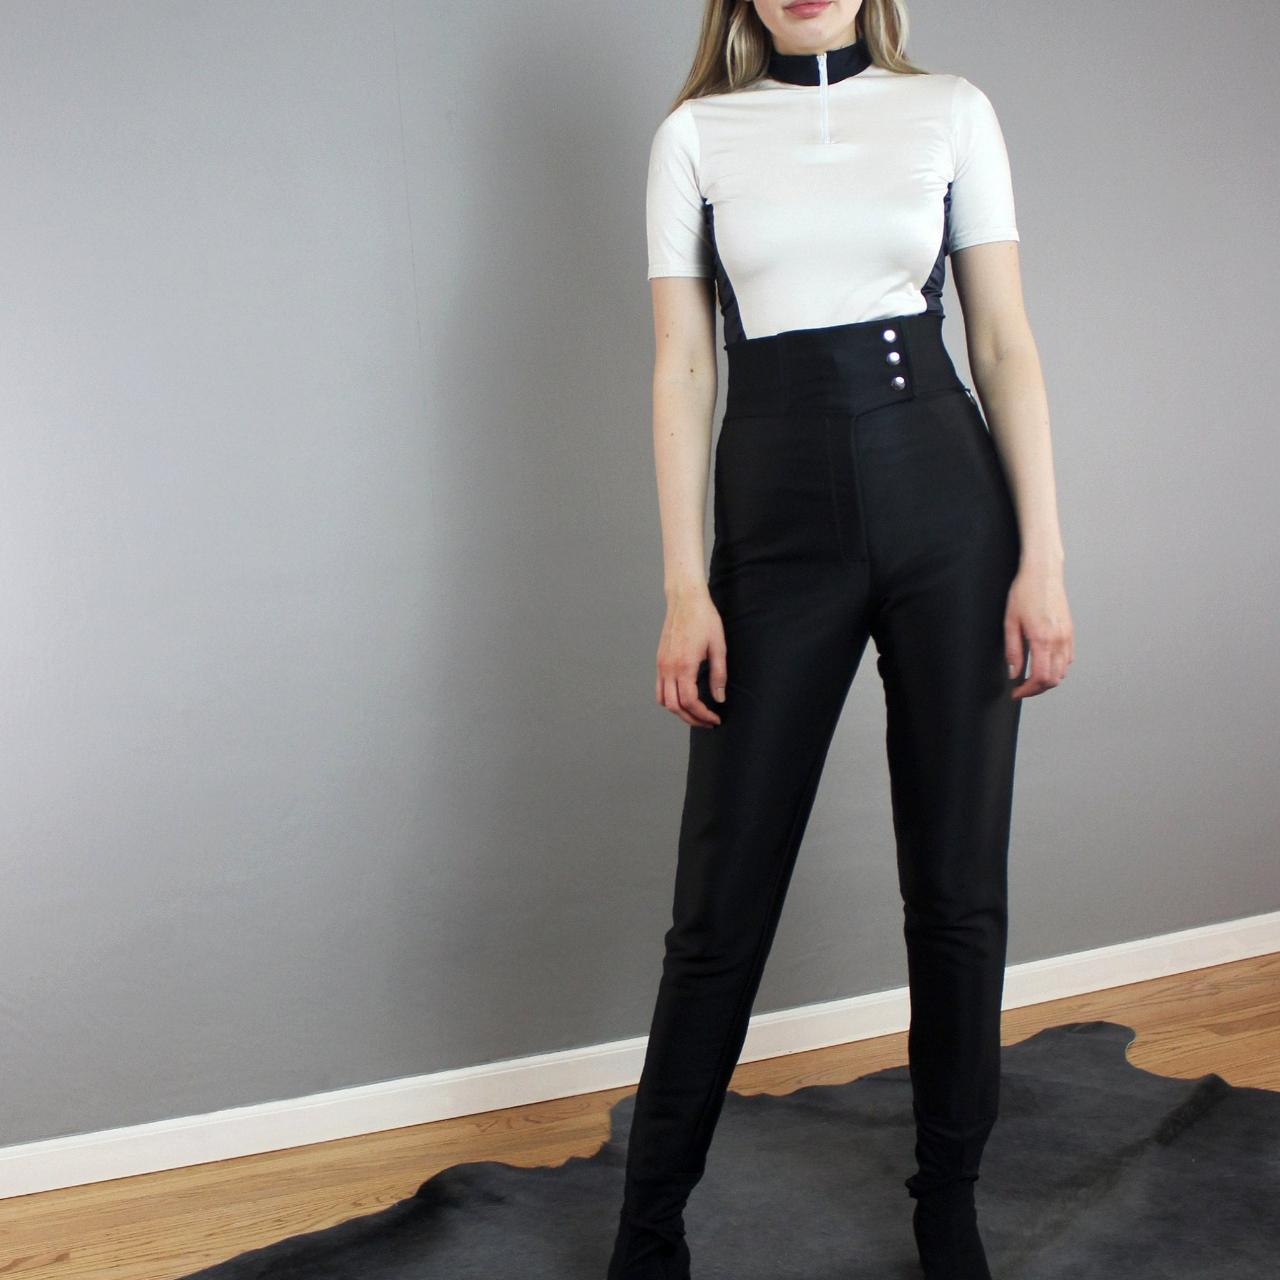 80s Gold High Waist Stirrup Pants - XS to Petite Small – Flying Apple  Vintage